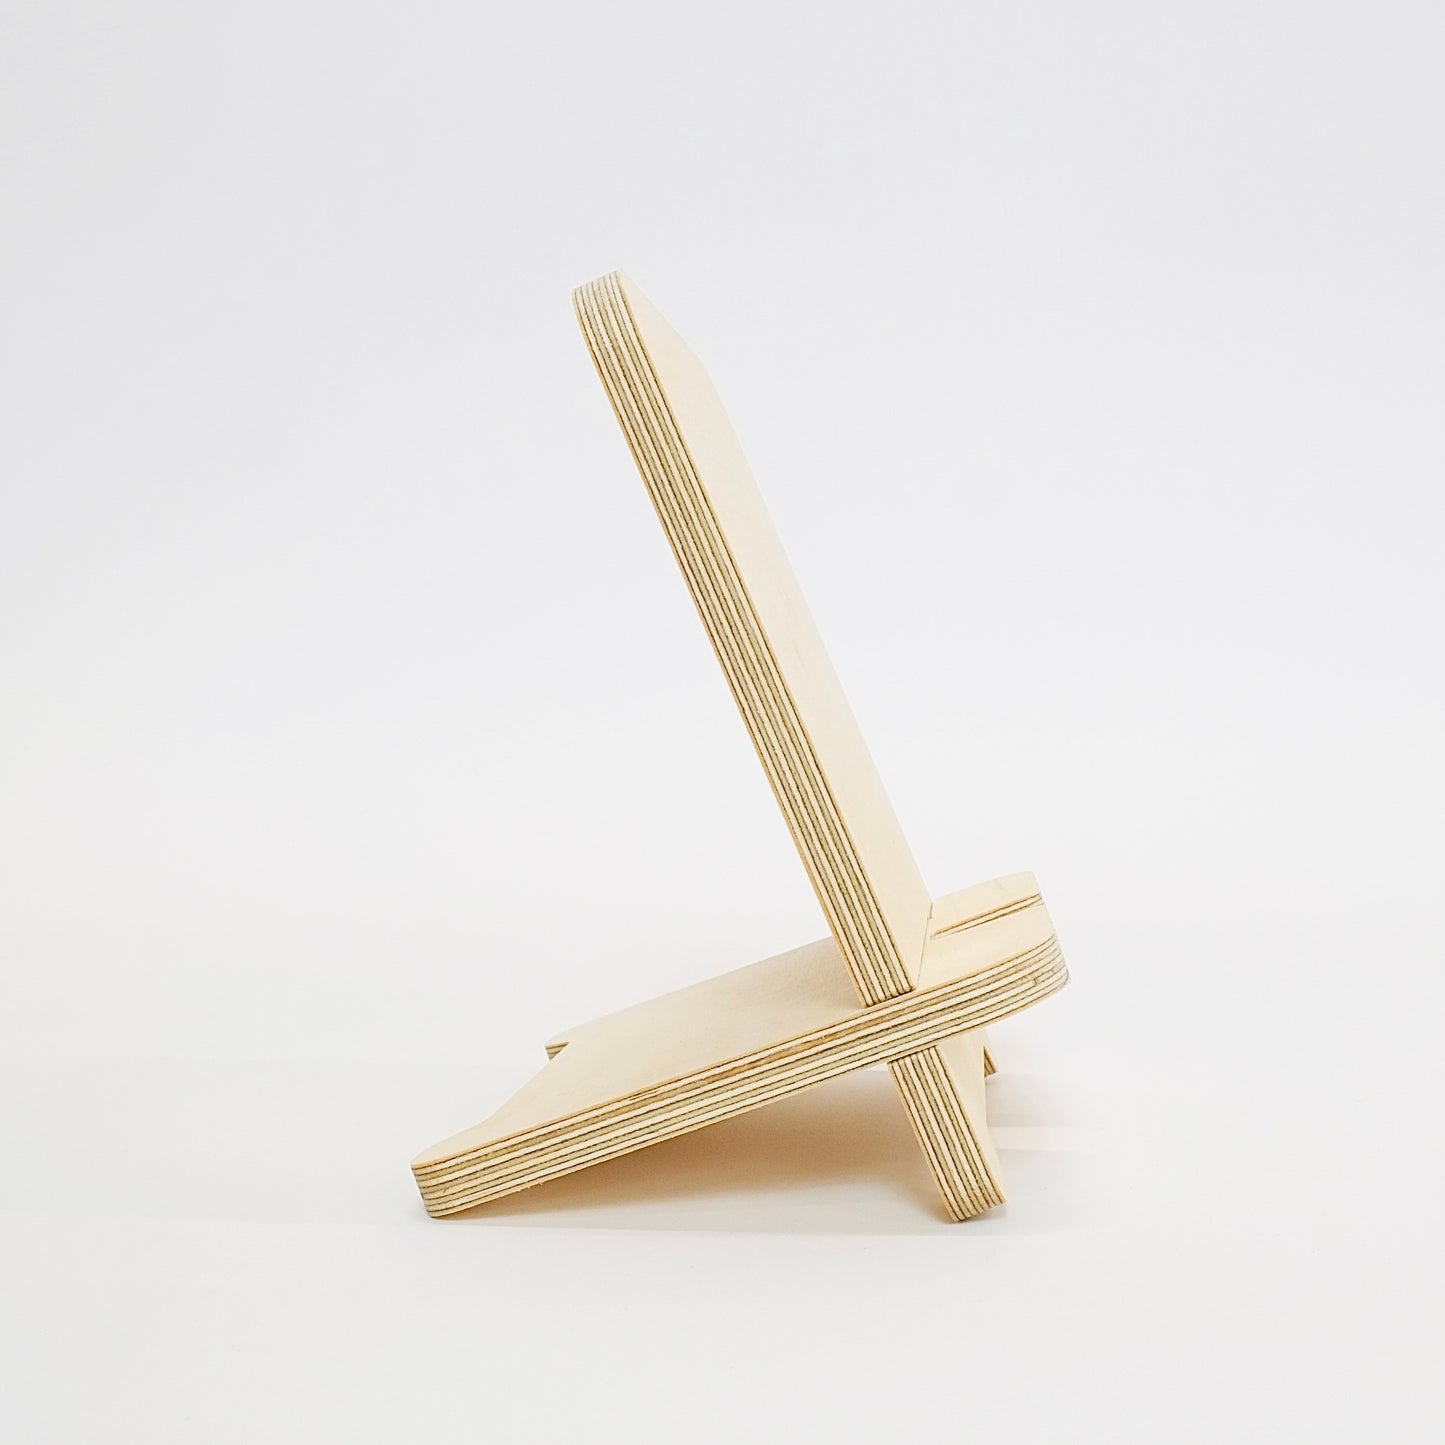 Side view of plywood tablet stand showing plywood layers.